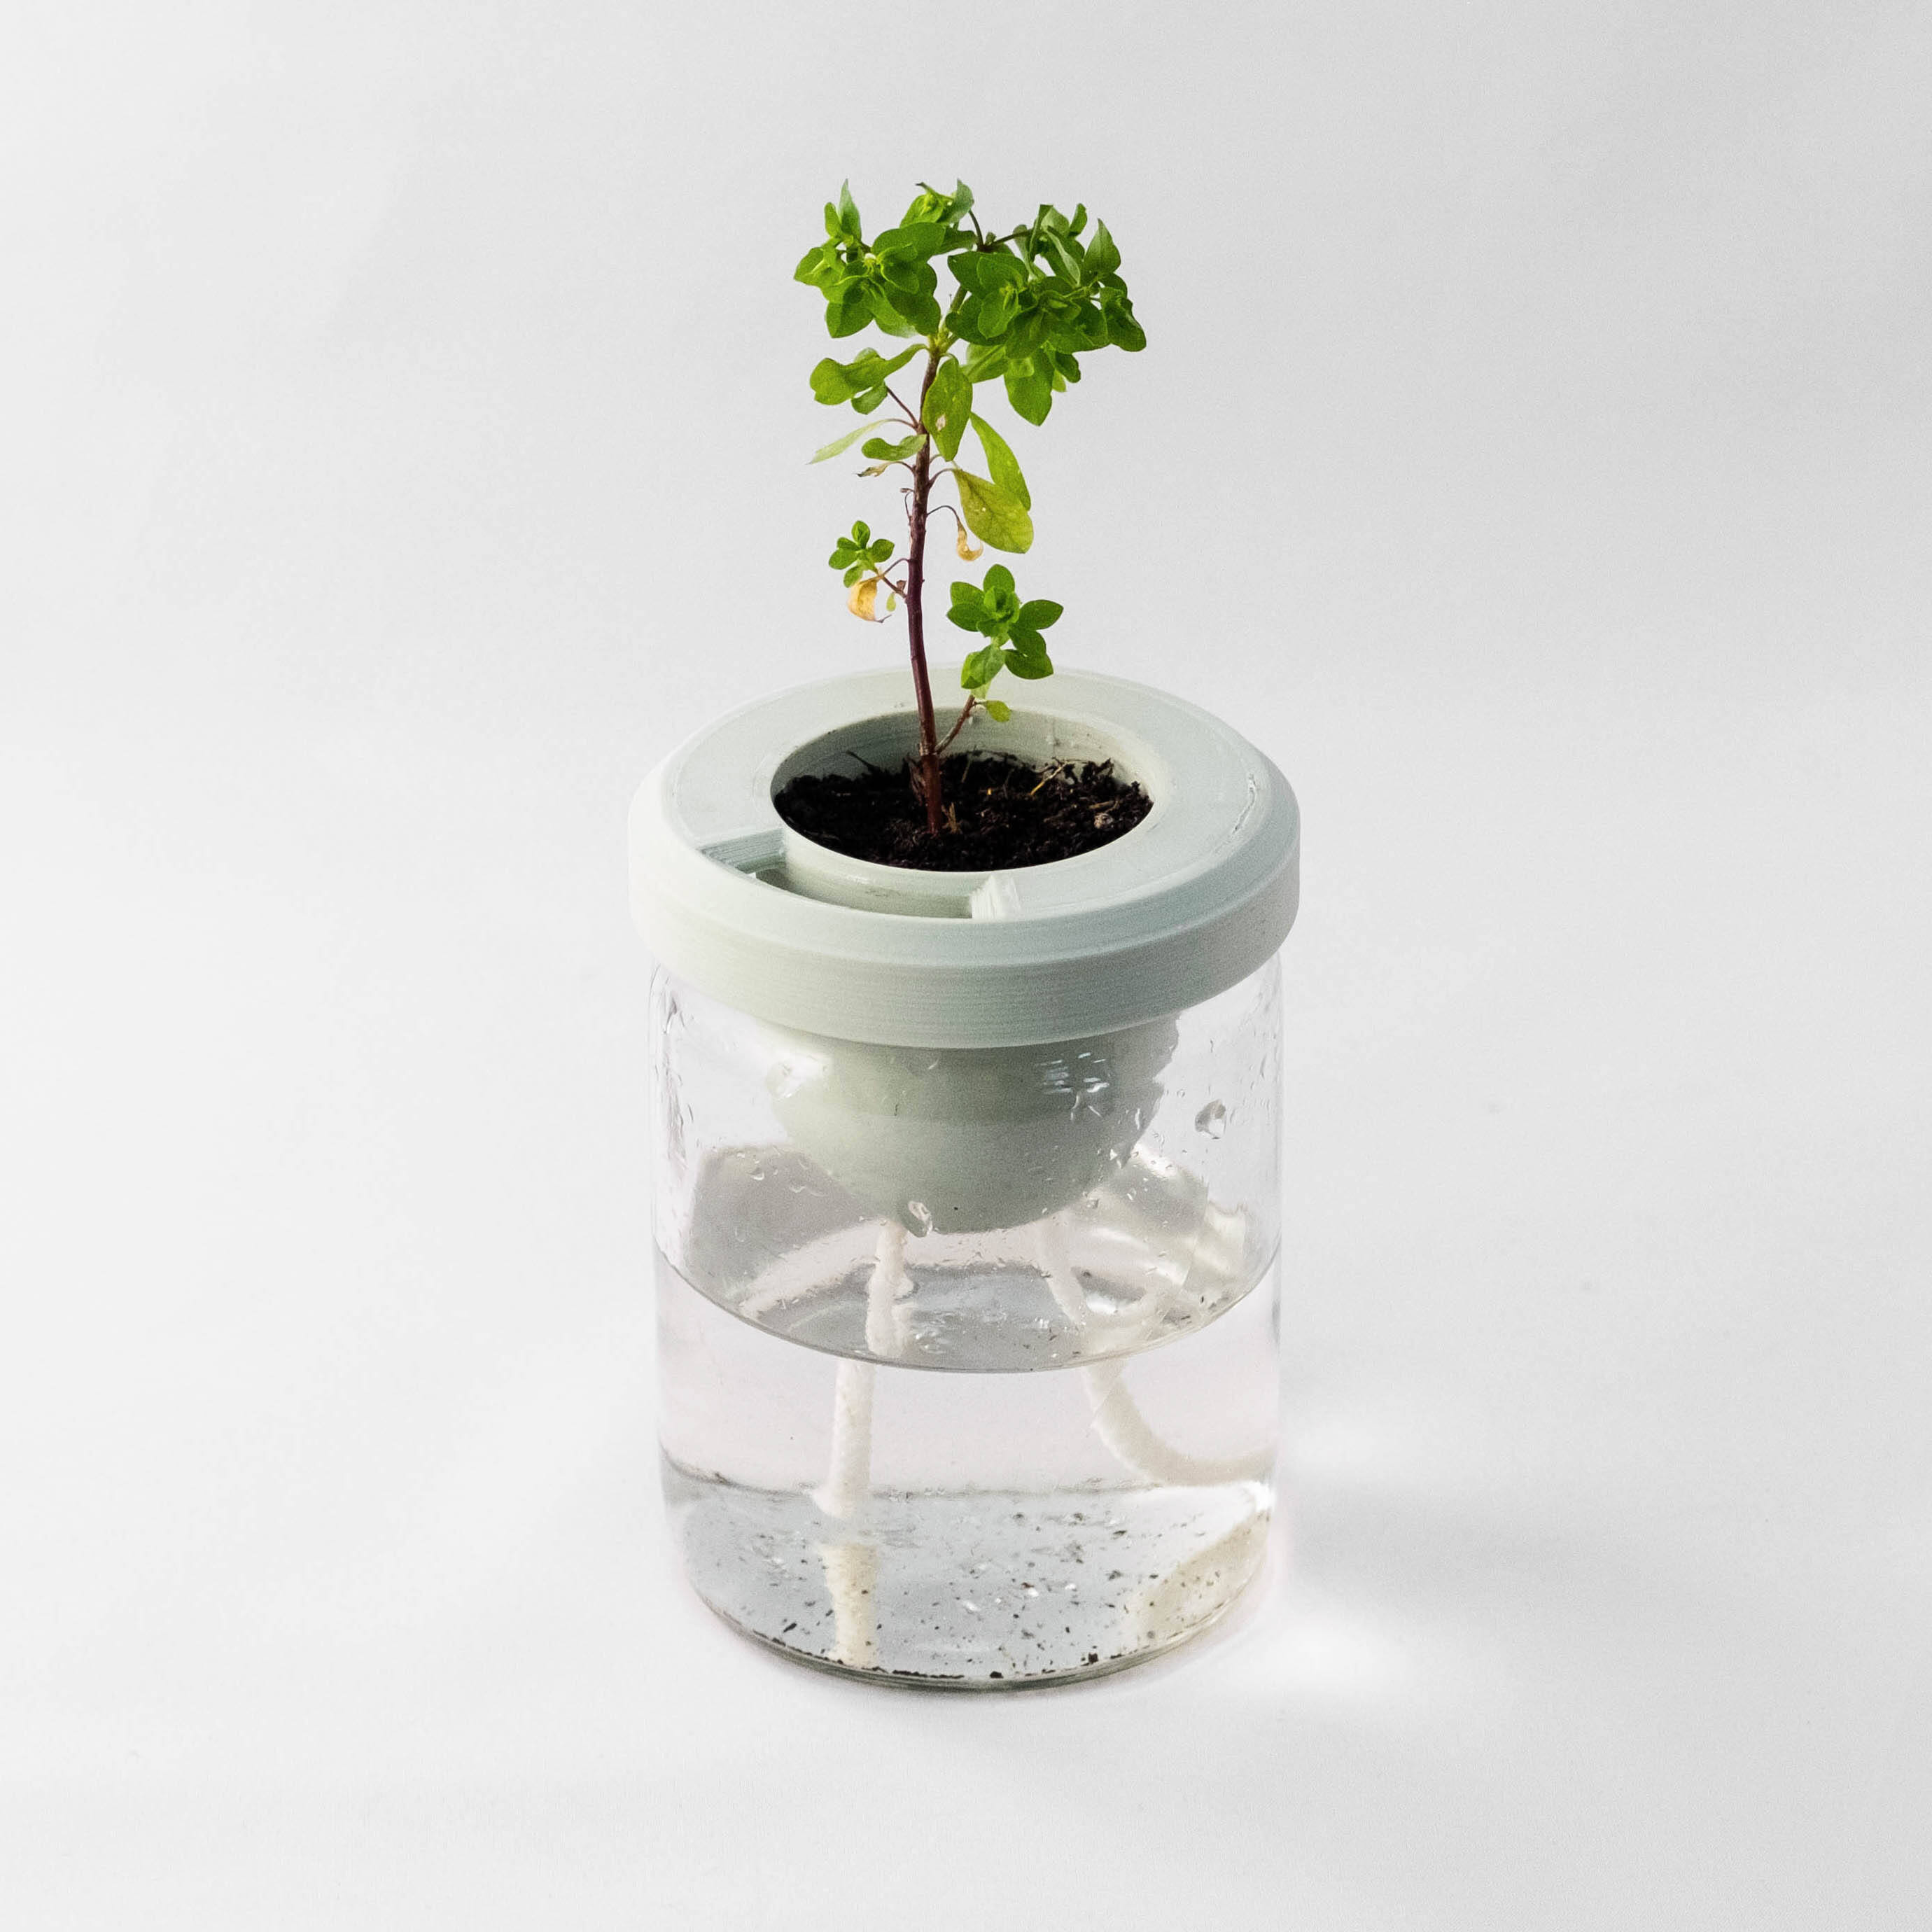 The self-watering upcycled pot